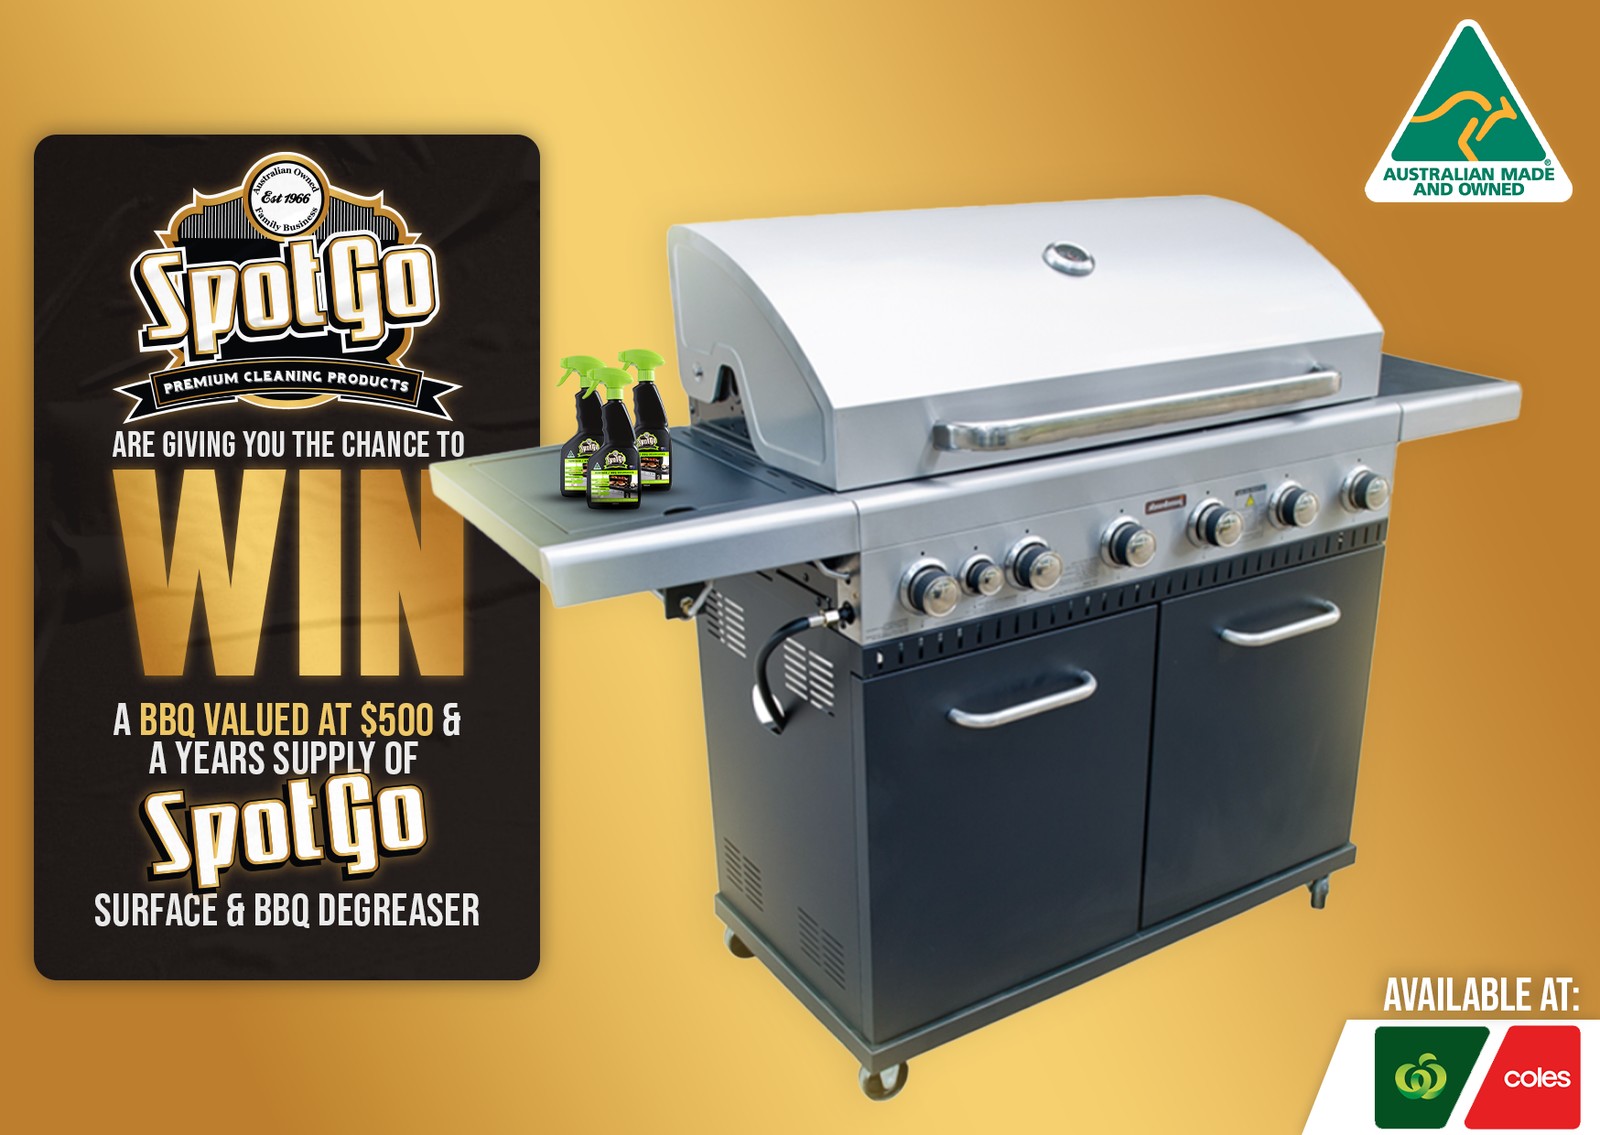 SpotGo are giving you the chance to win a BBQ valued at $500 and a year&aps;s supply of SpotGo Surface and BBQ Degreaser